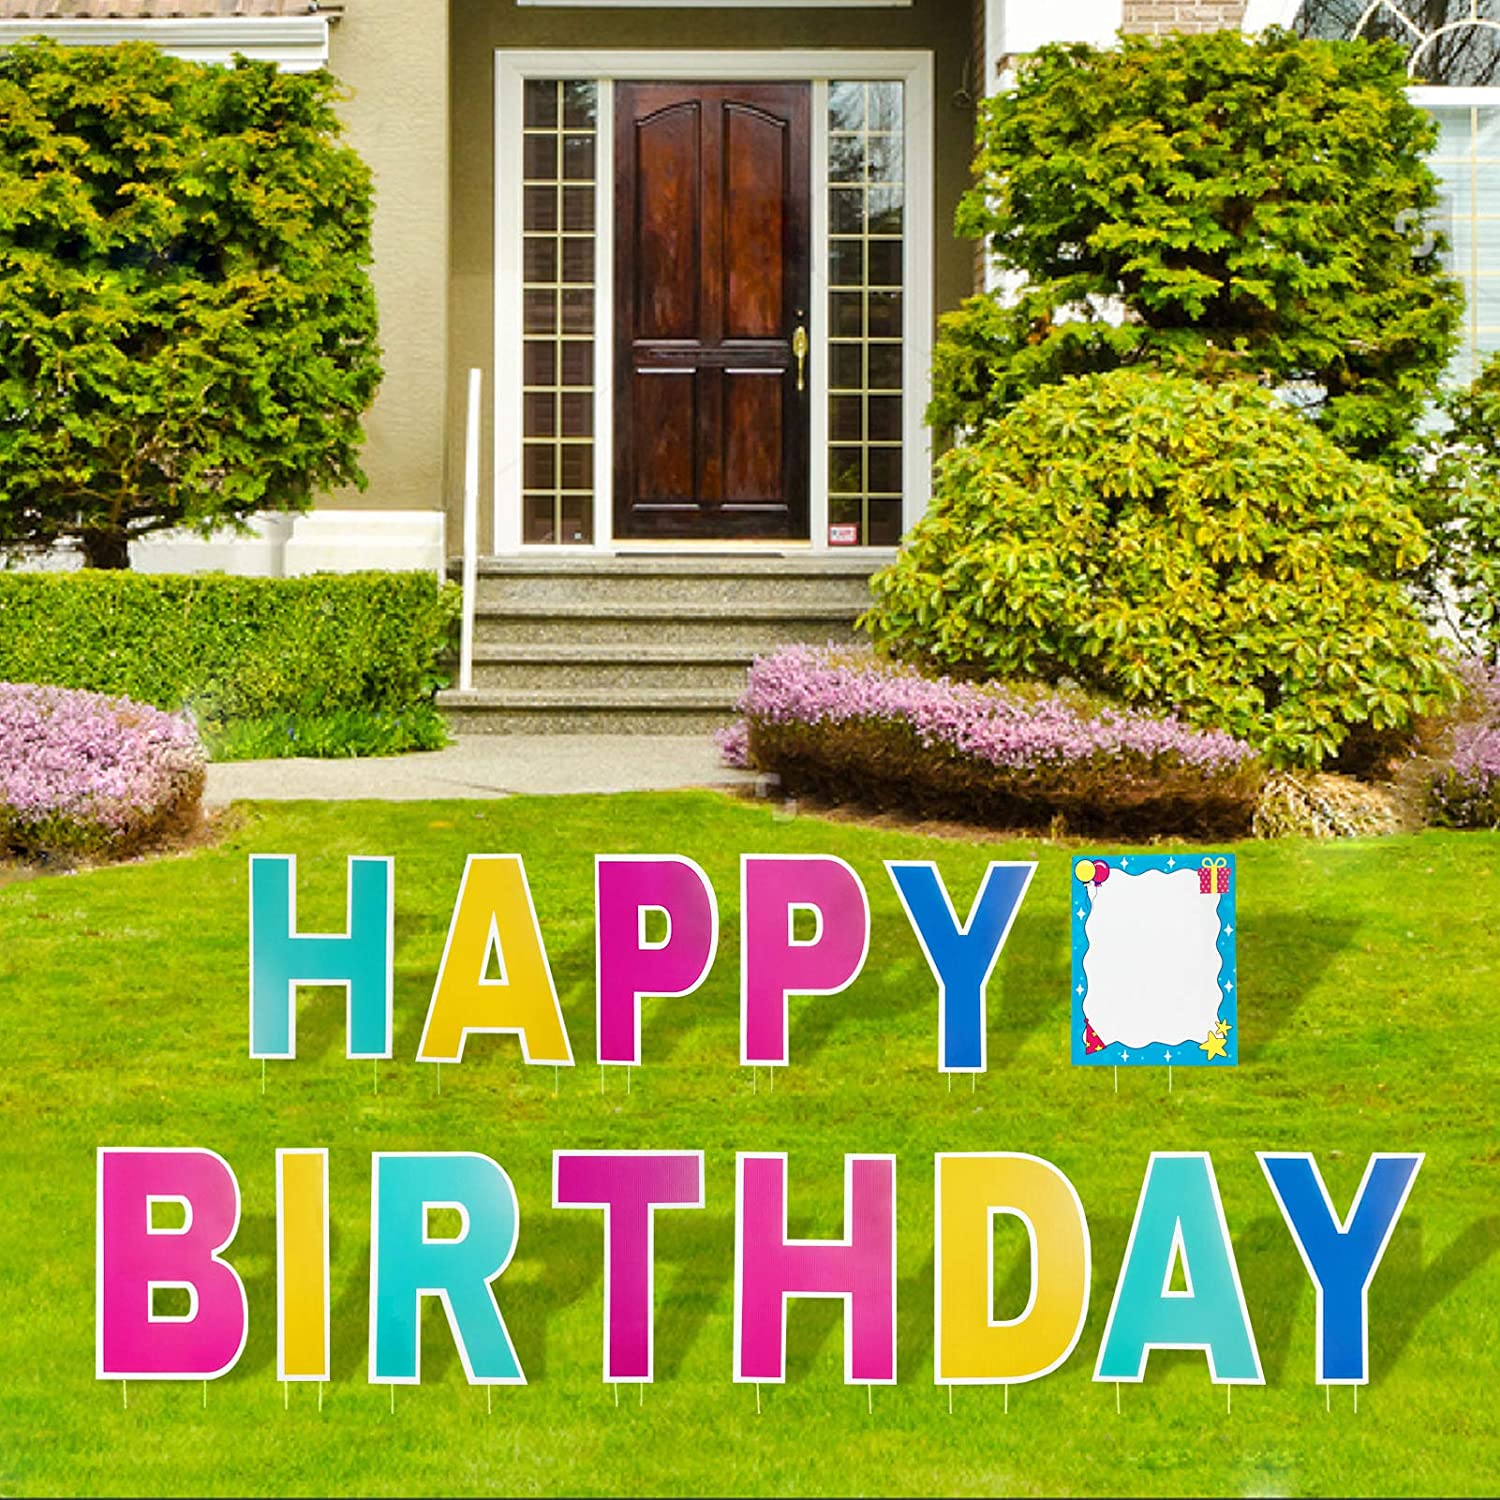 Happy Birthday Yard Sign 16 Inch Birthday Letters Lawn Sign Colorful Birthday Yard Decoration with Stakes Cake Balloon Waterproof Garden Lawn Decor for Outdoor Birthday Party Supplies